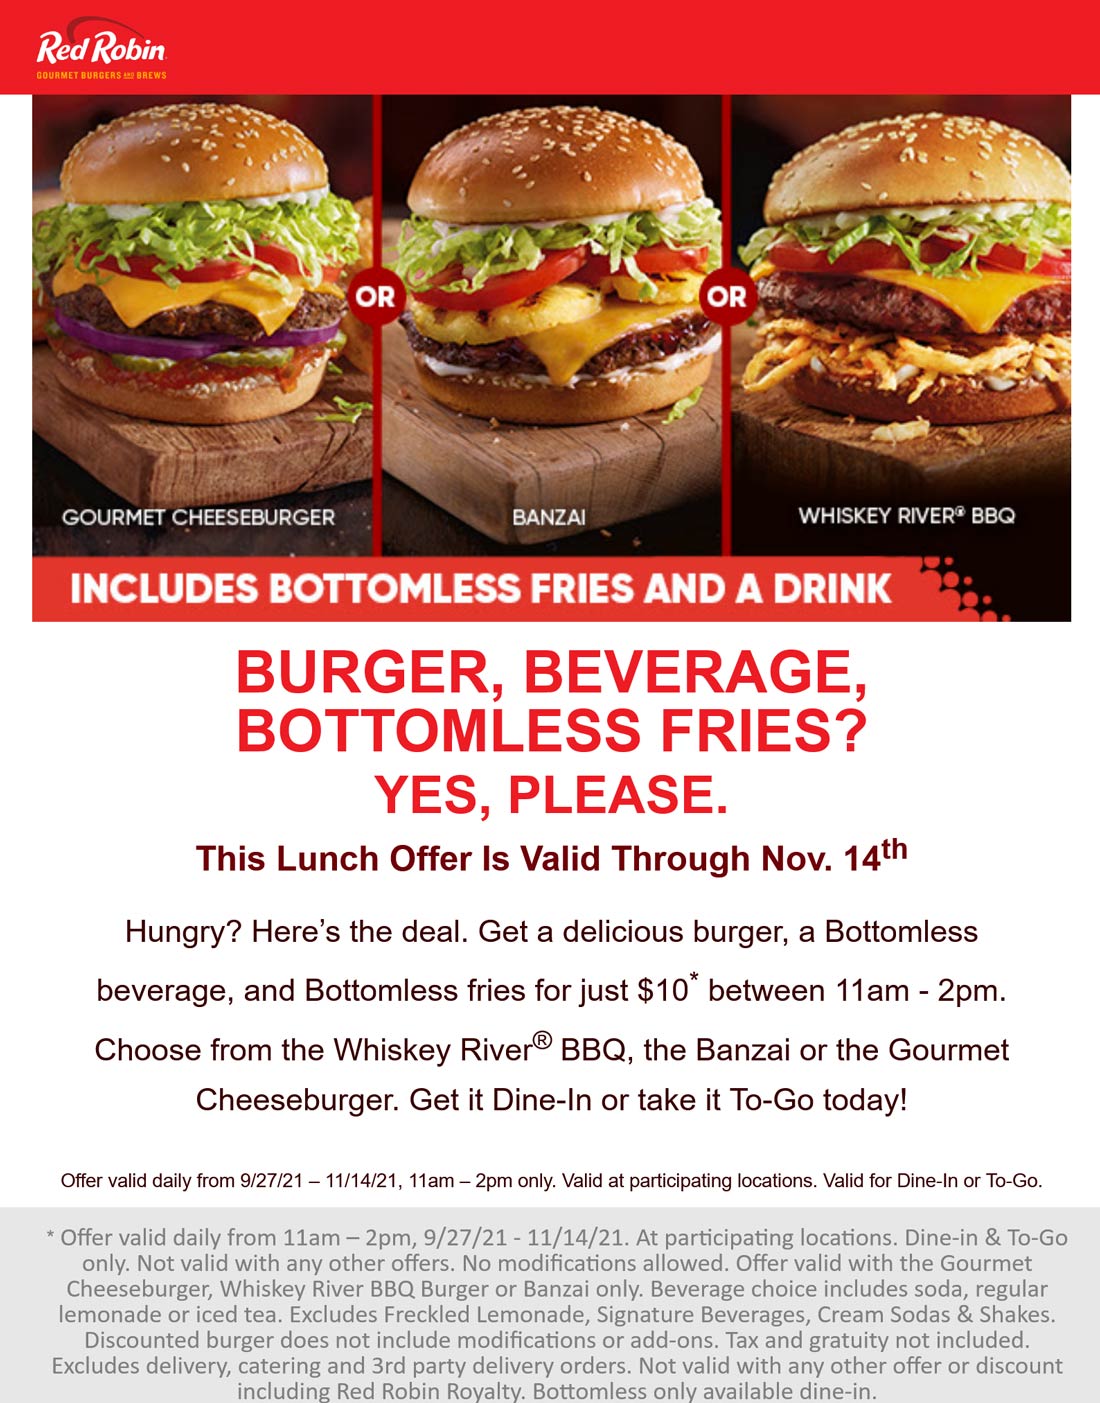 Red Robin restaurants Coupon  Gourmet cheeseburger + endless fries + bottomless drink = $10 daily 11a-2p at Red Robin #redrobin 